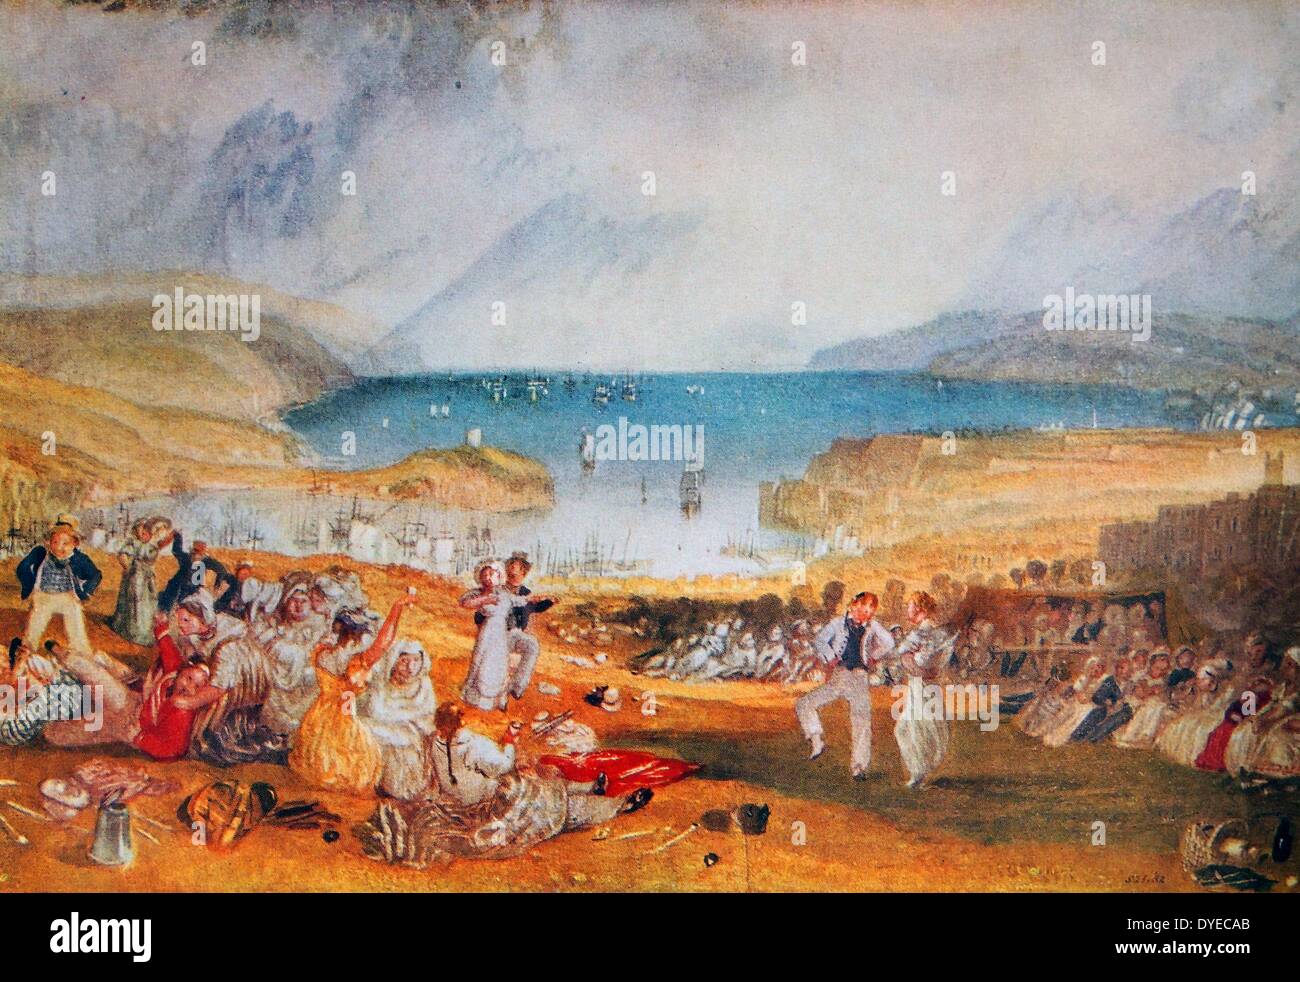 Watercolour landscape scene painting titled 'The Hoe, Plymouth'. The painting depicts a coastal scene with men and women celebrating and dancing, with the sea in the background populated with various boats. By Joseph Mallord William Turner (1775 - 1851) English romantic landscape painter. Dated 1812 Stock Photo